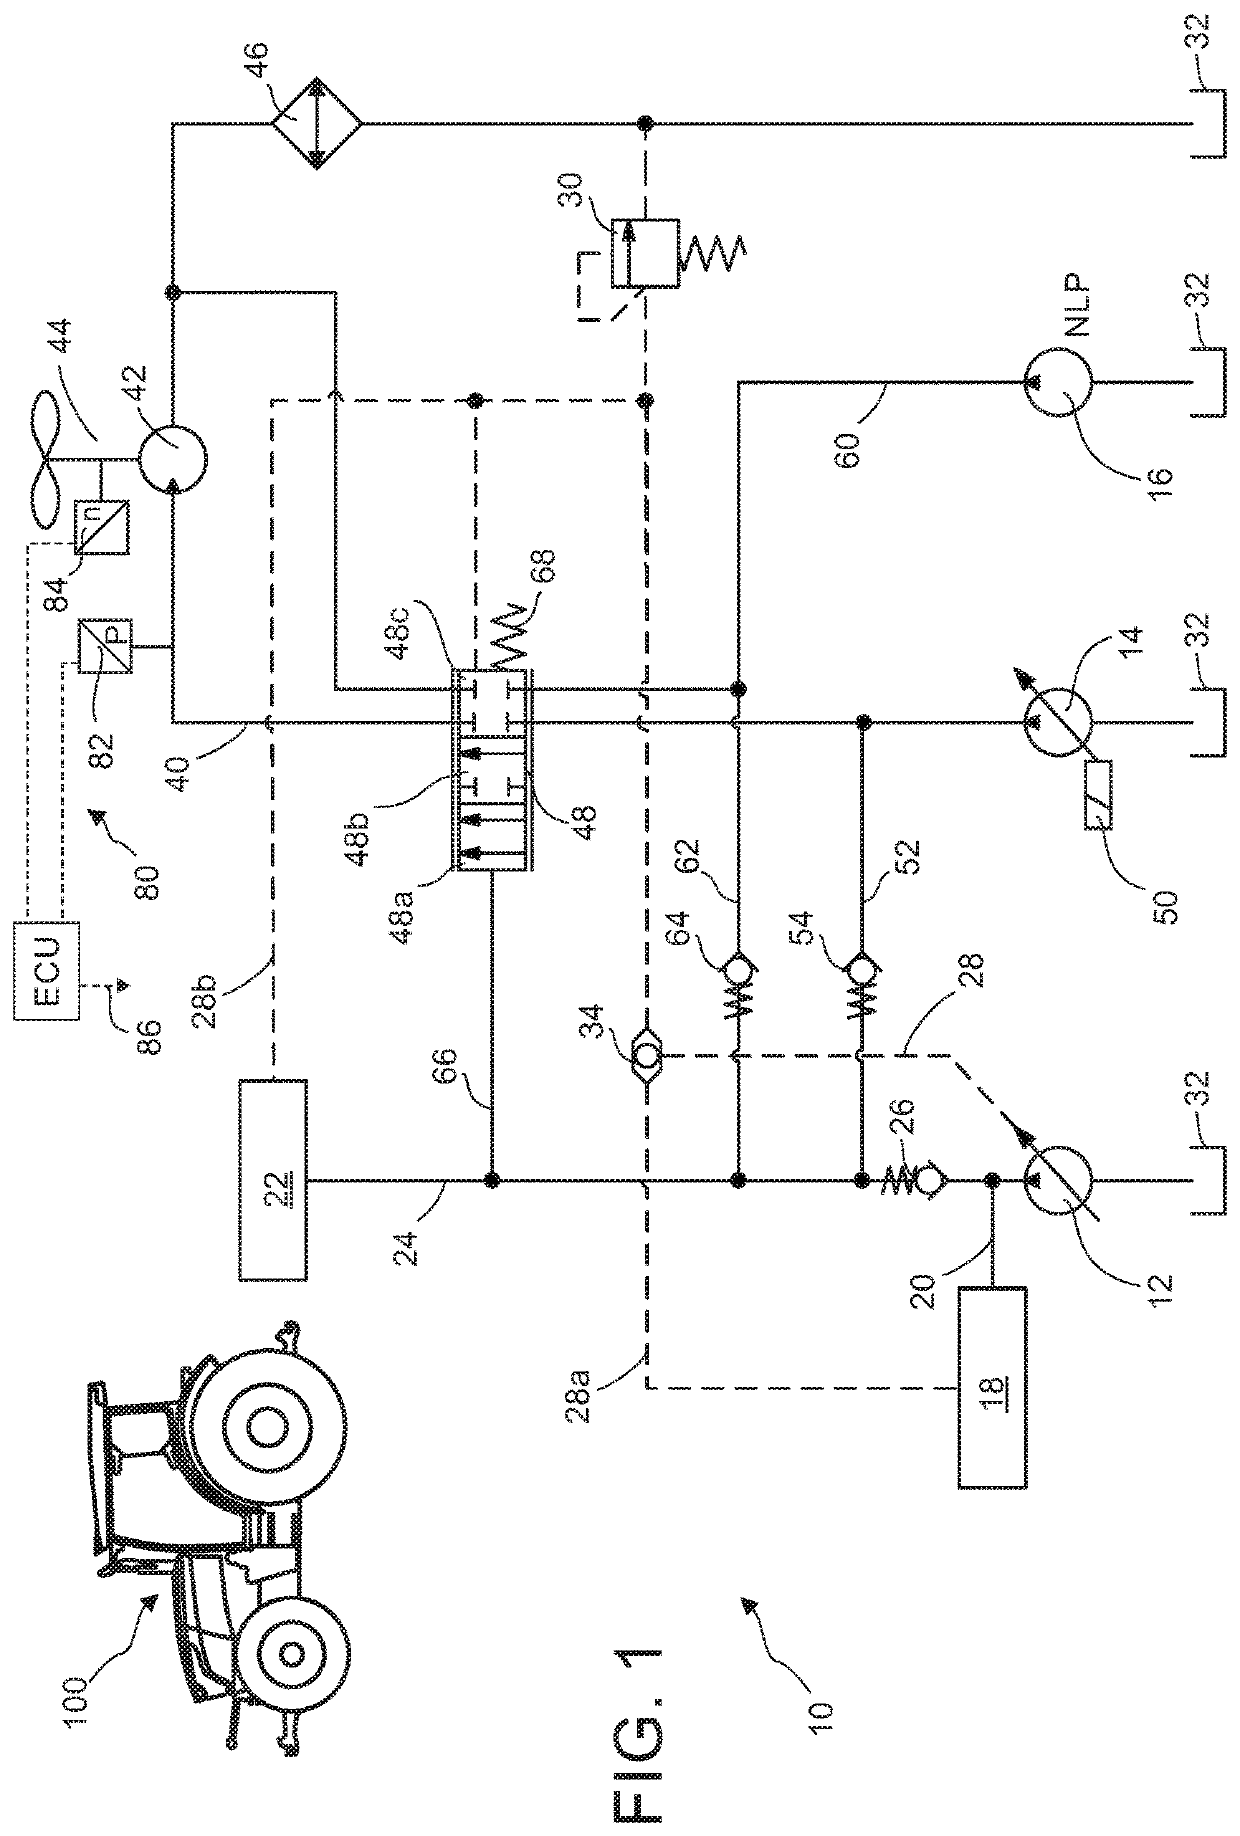 Pressurized fluid supply system for an agricultural vehicle